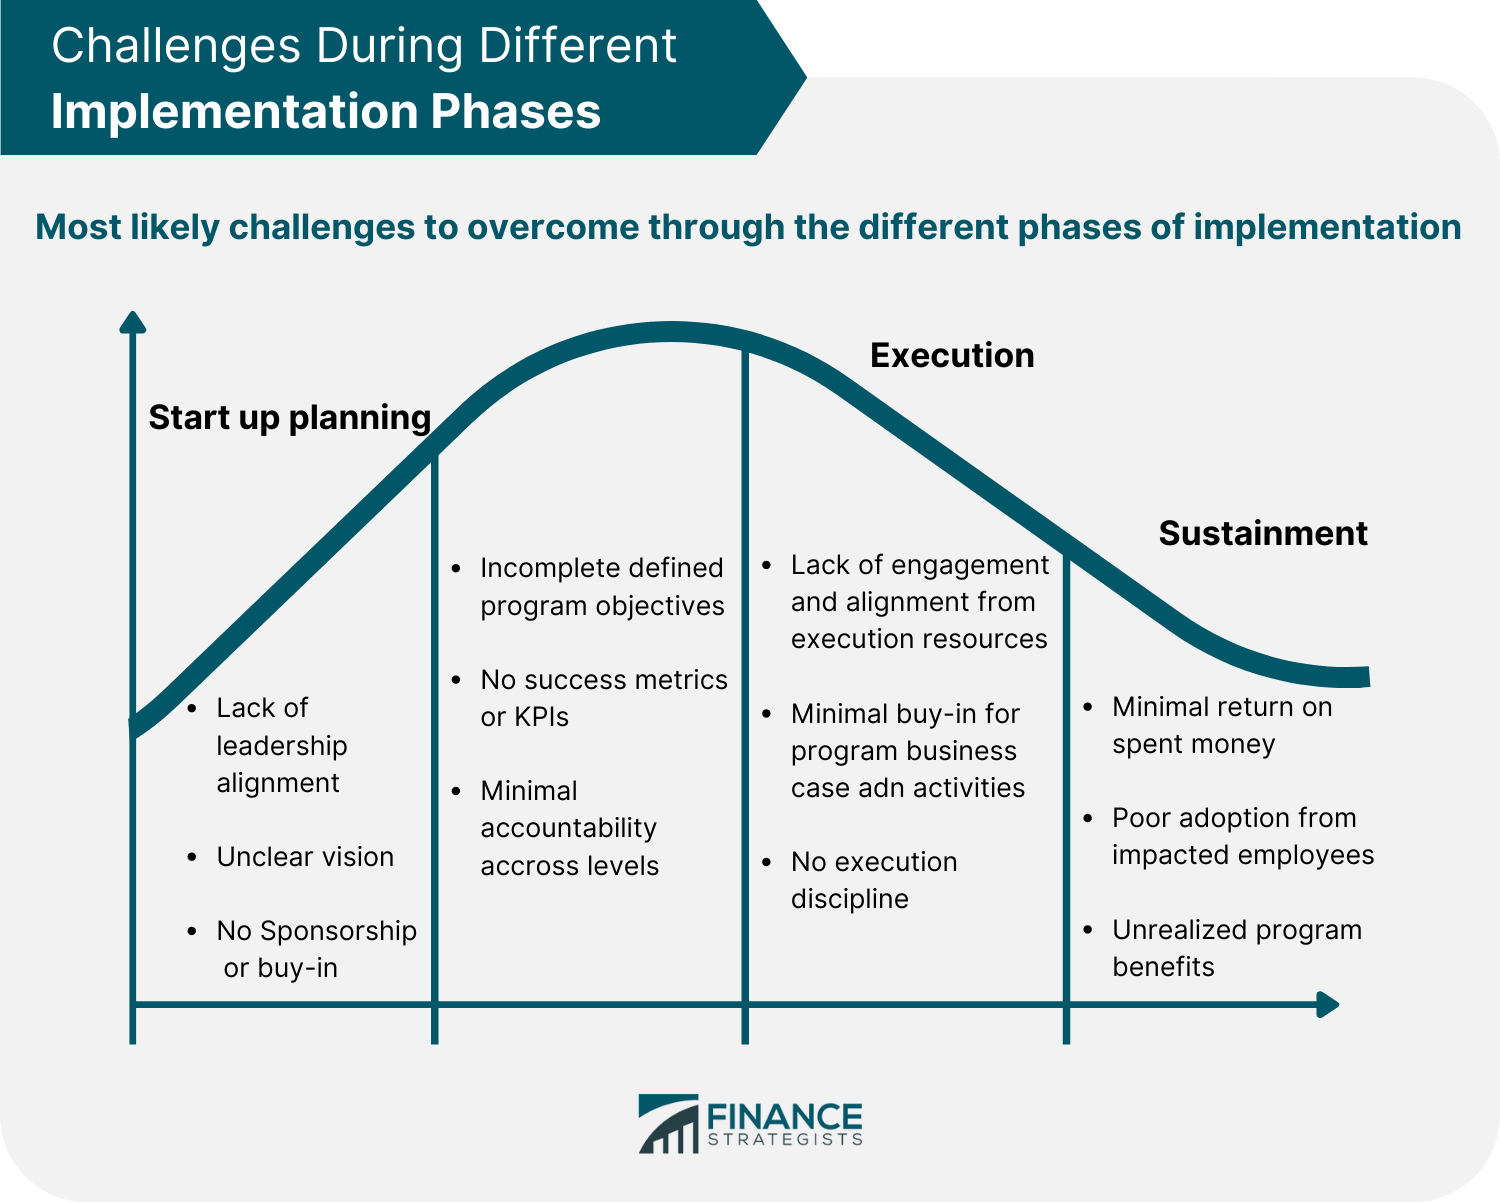 Challenges during different implementation phases